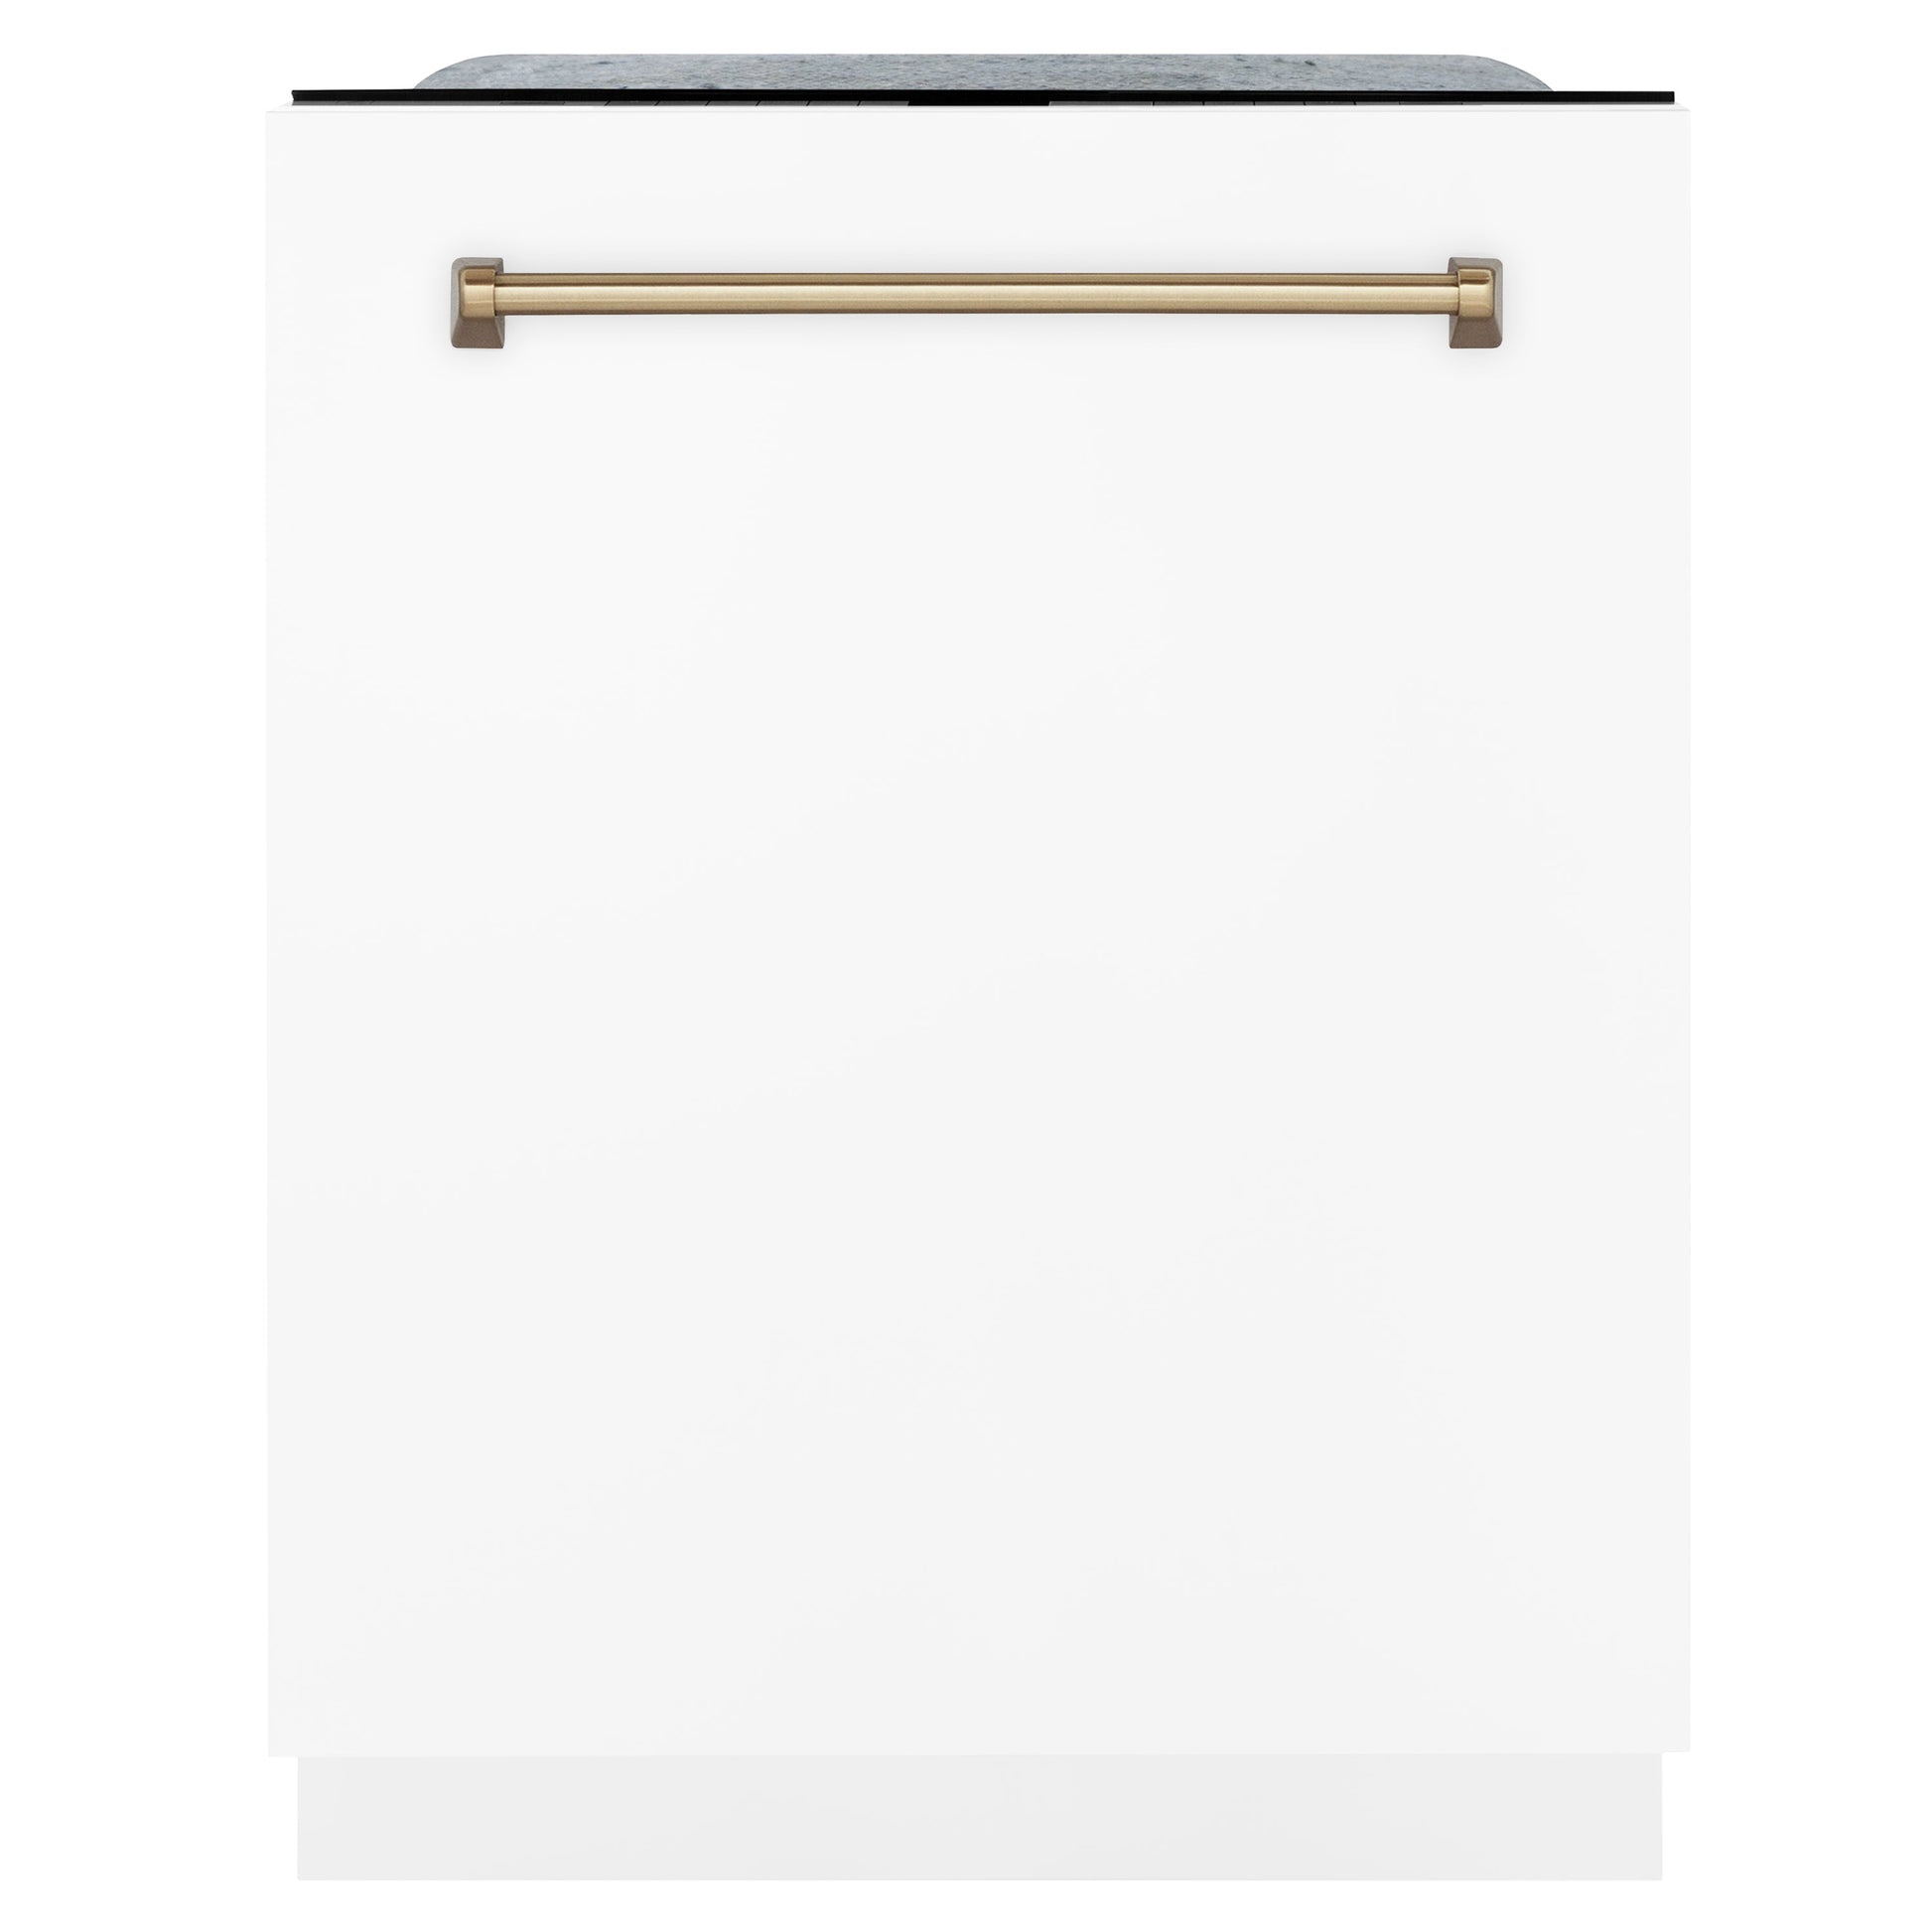 ZLINE 3-Appliance 36" Autograph Edition Kitchen Package with Stainless Steel Dual Fuel Range with White Matte Door, Range Hood, and Dishwasher with Champagne Bronze Accents